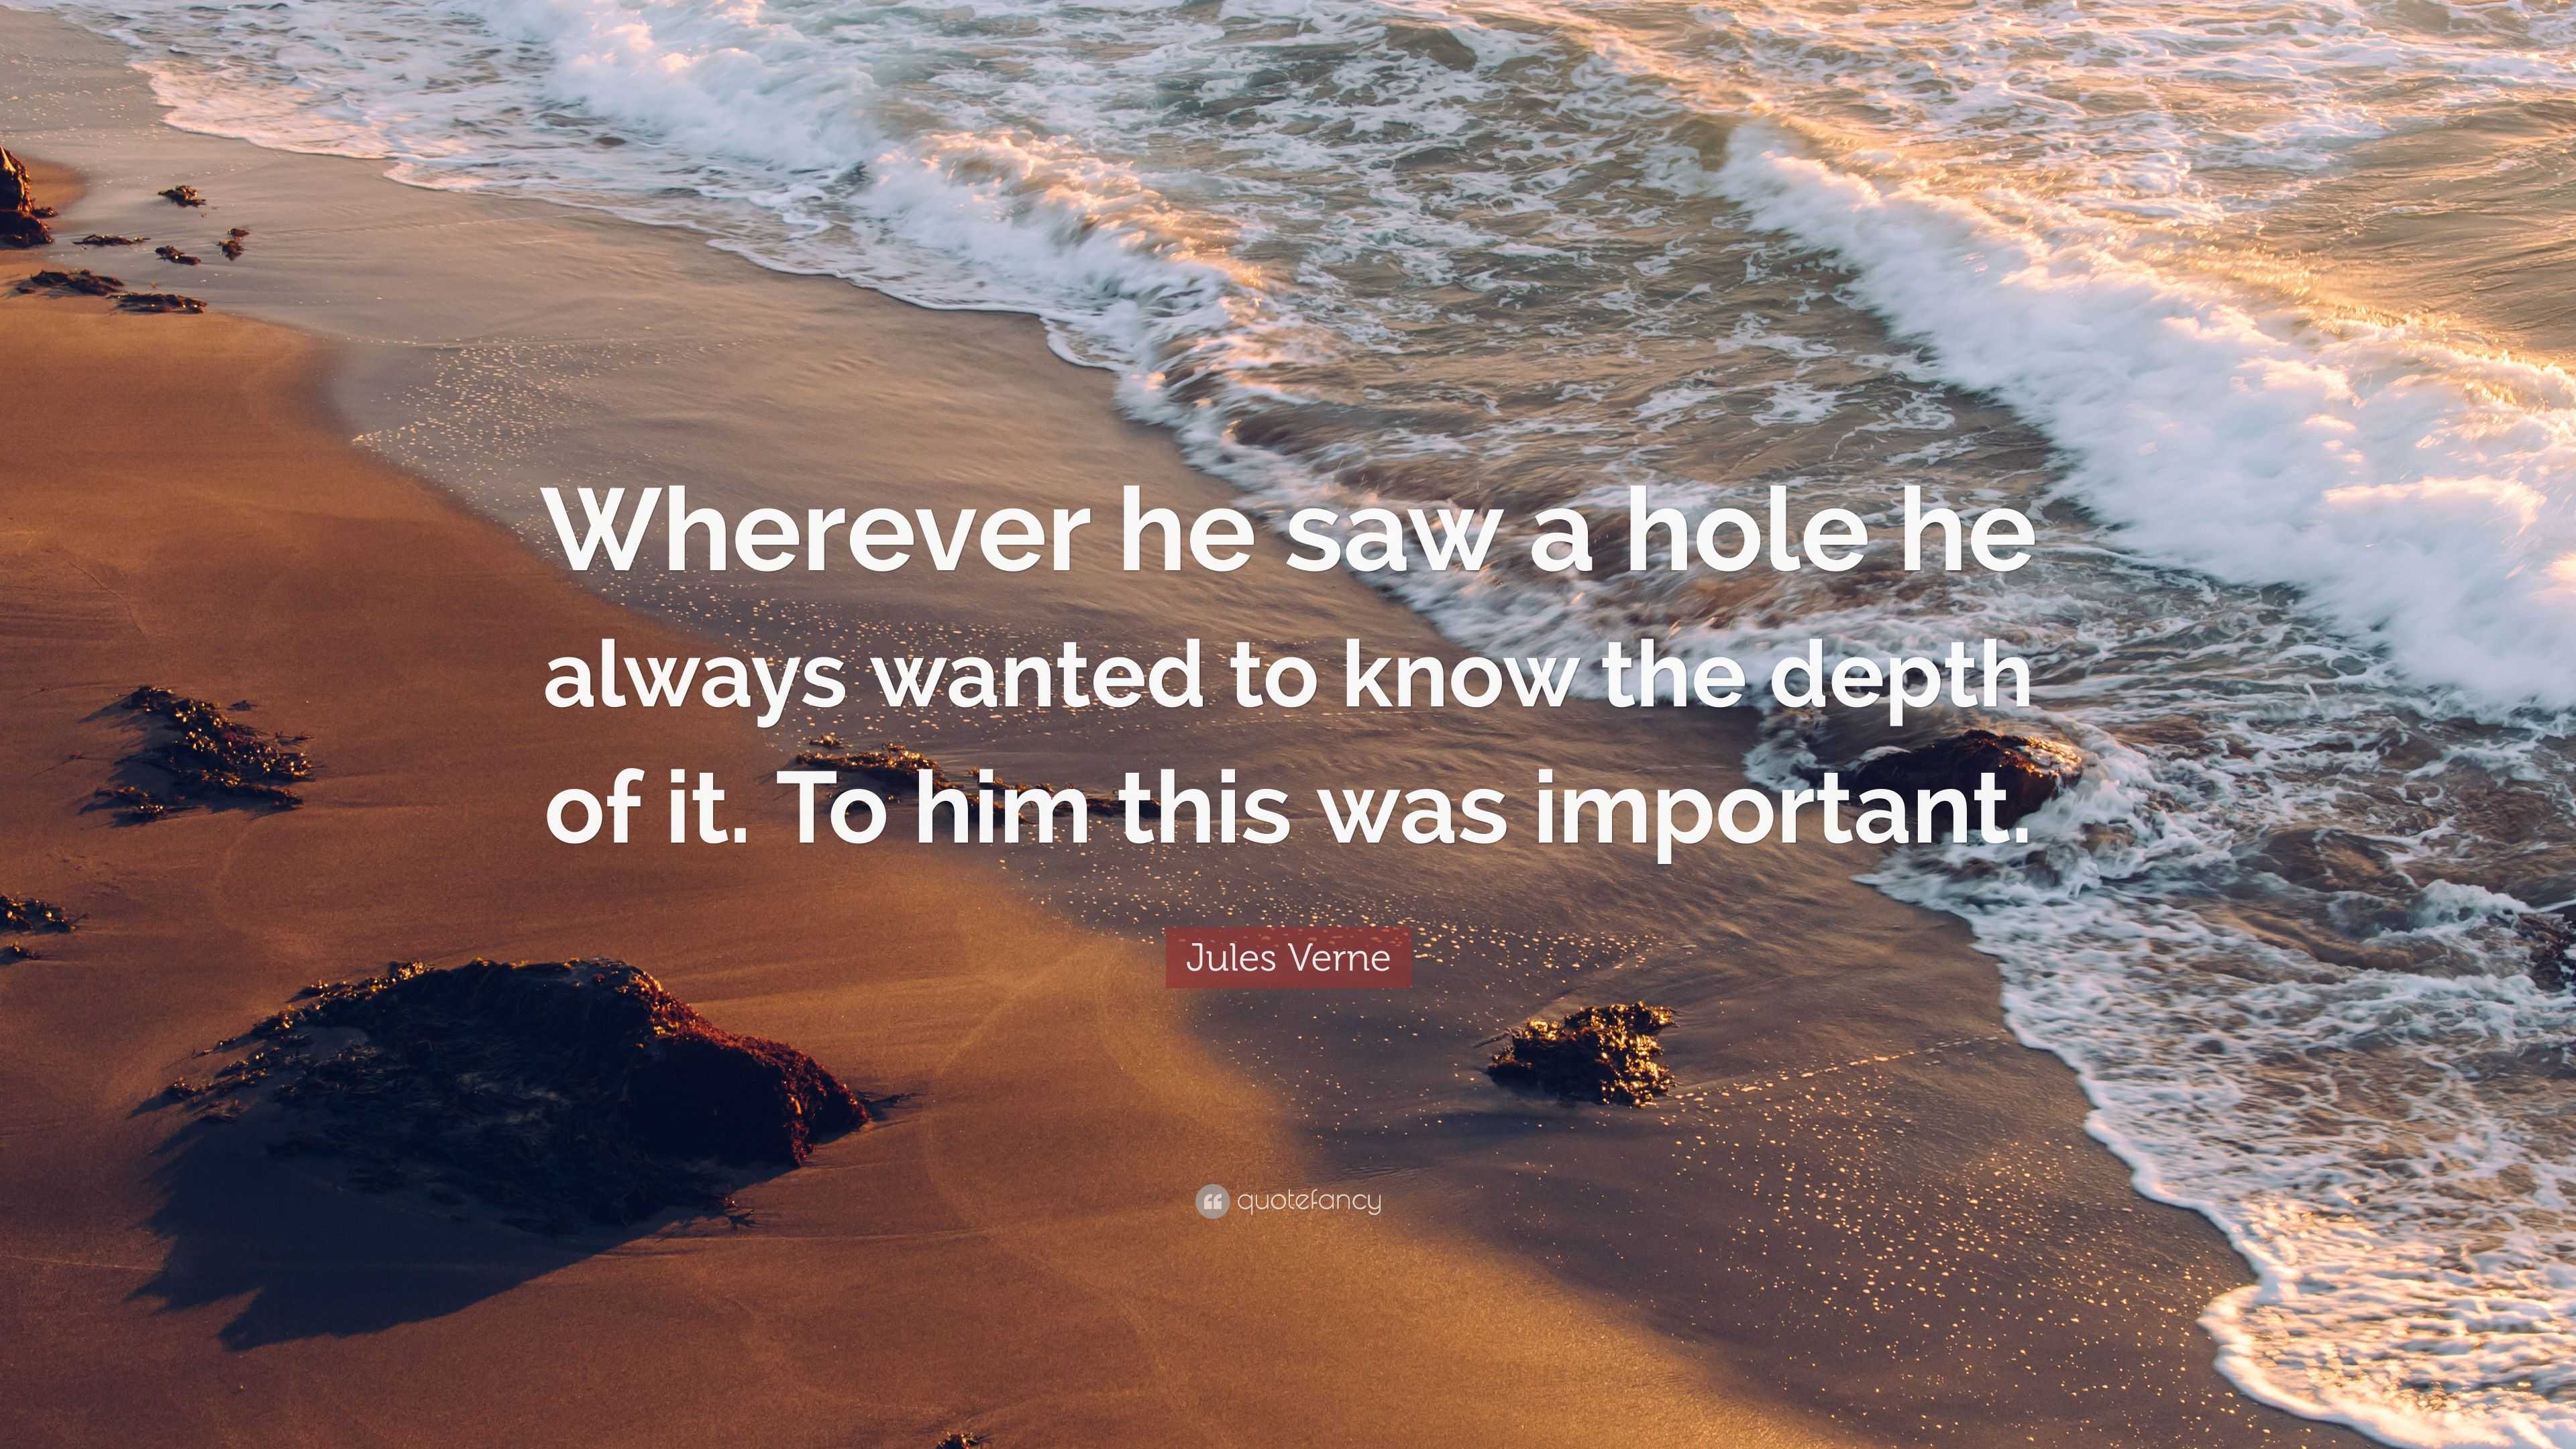 Jules Verne Quote: “Wherever he saw a hole he always wanted to know the ...